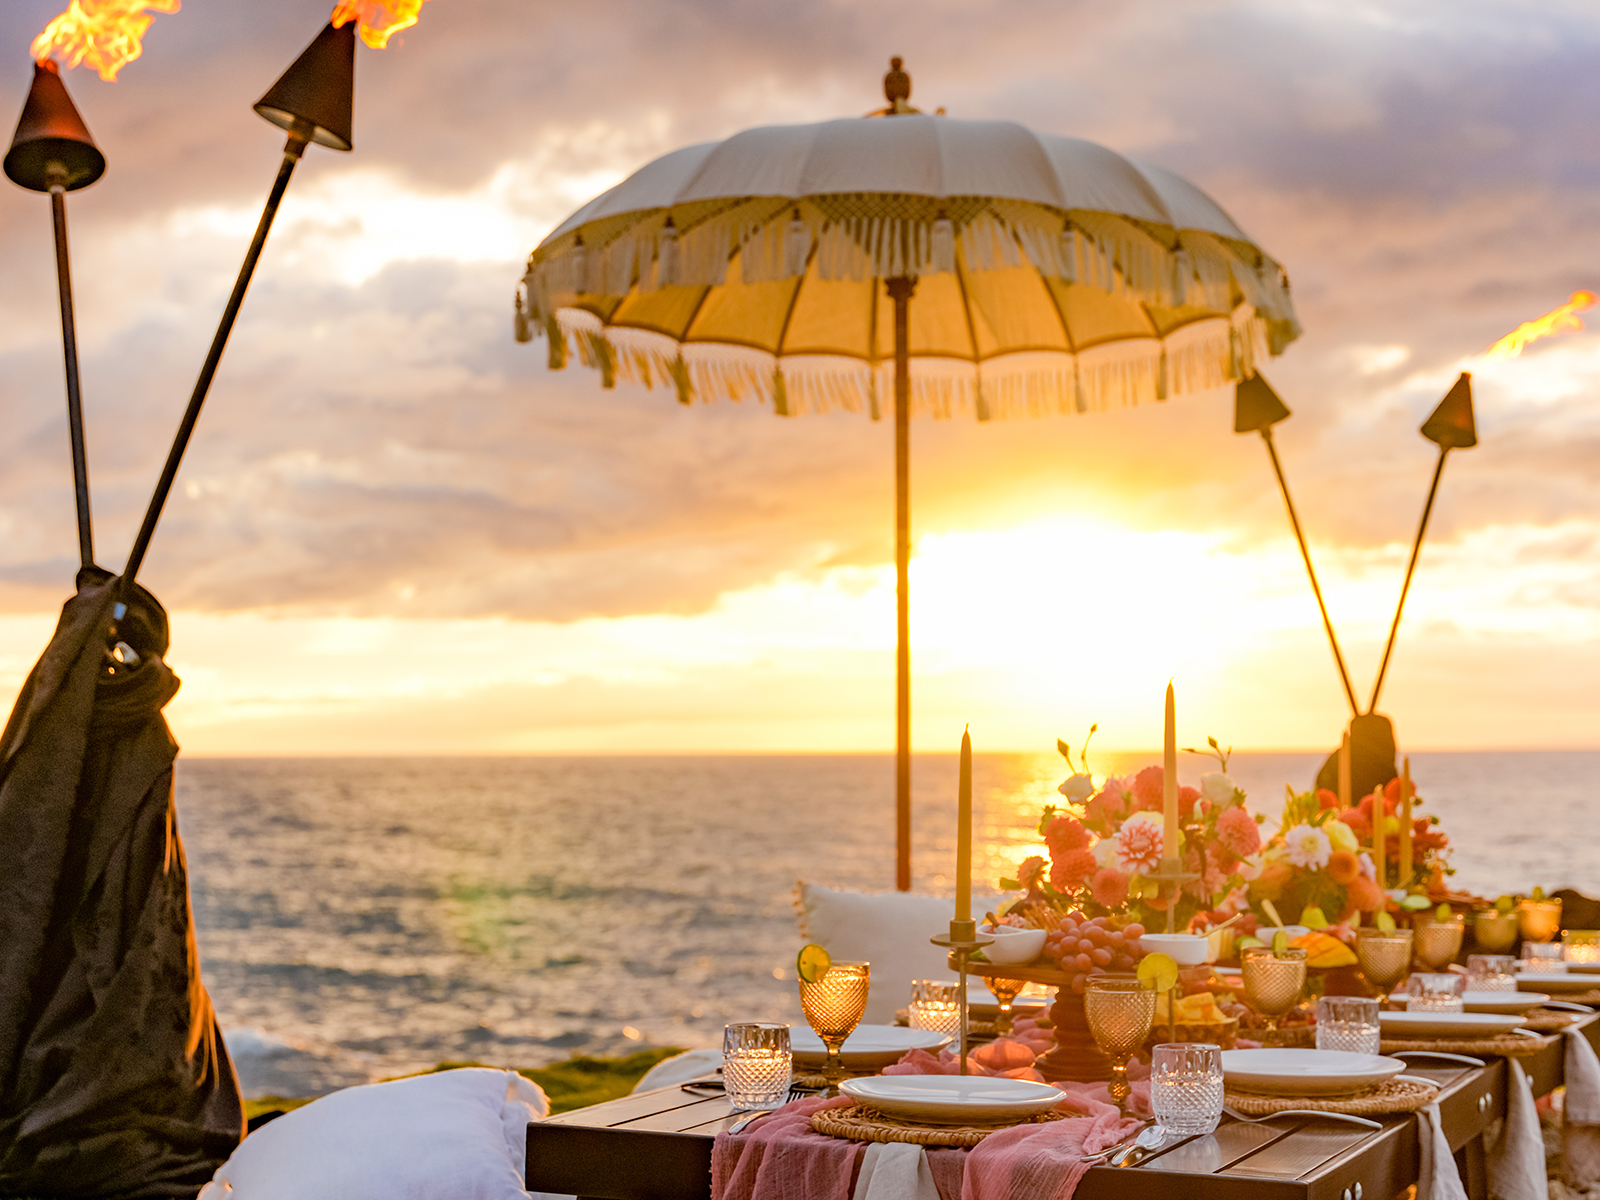 Low table picnic setting overlooking the sun setting into the sea